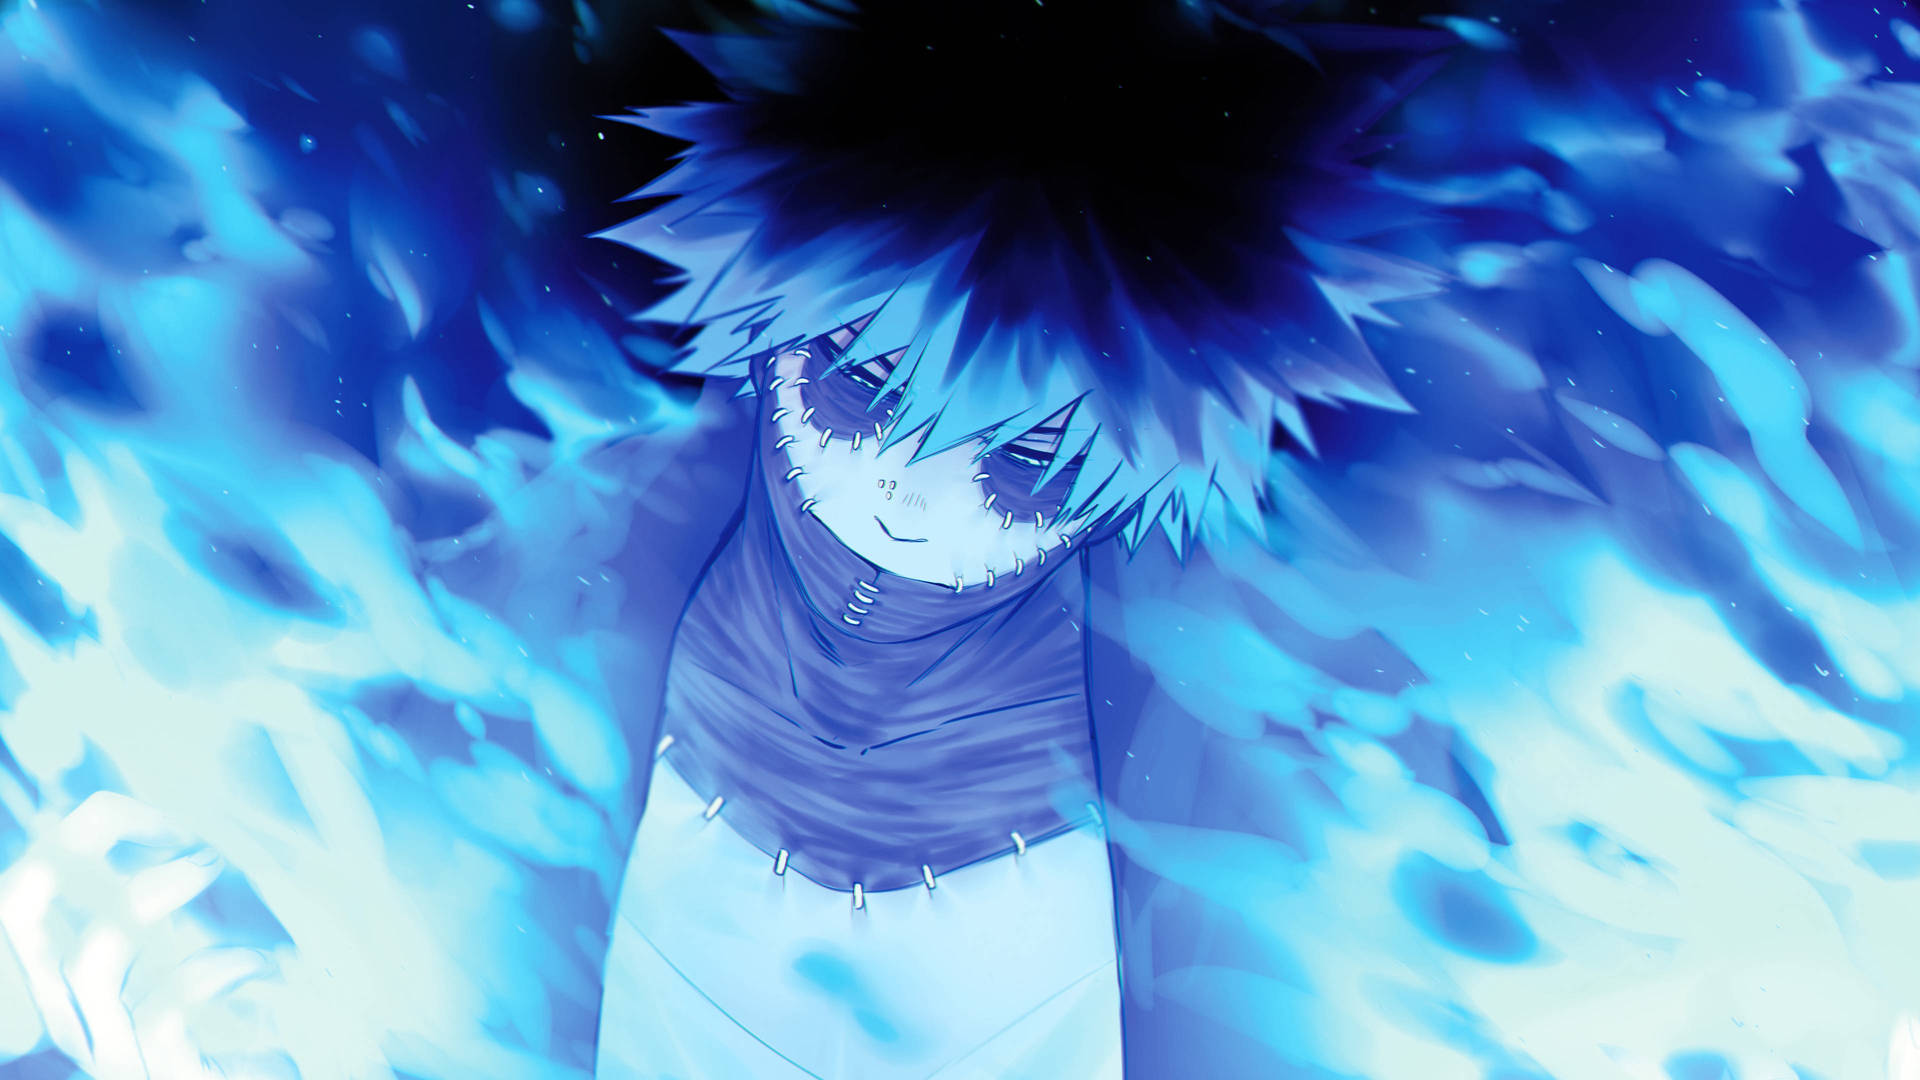 Dabi Standing In The Flames Of Change